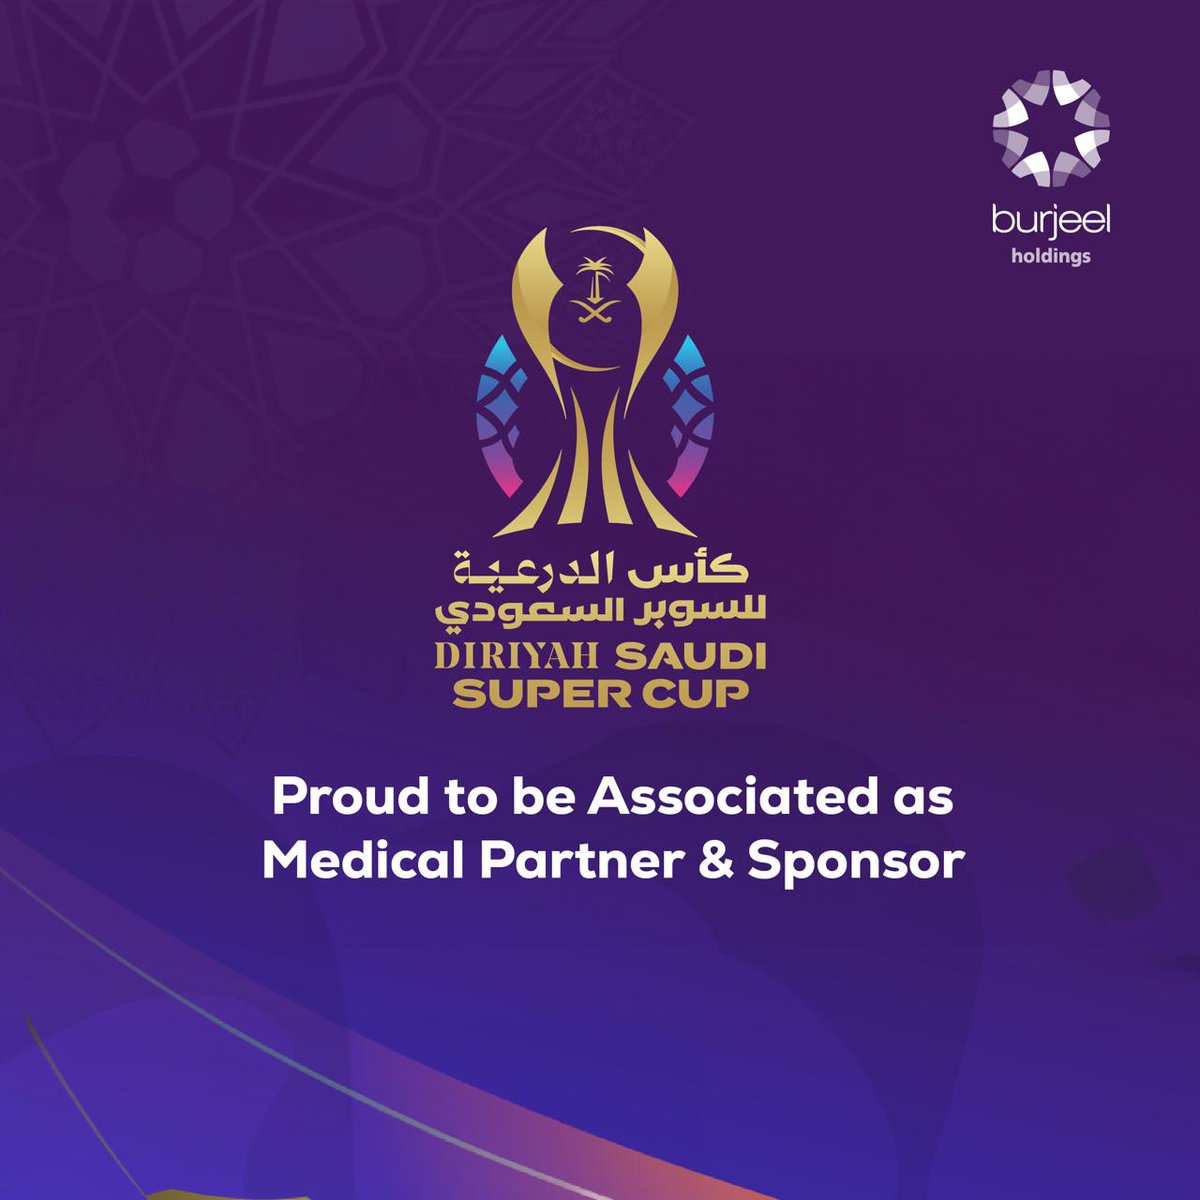 Proud to be the Medical Partner & Sponsor for the #Diriyah #SaudiSuperCup 2024 in #AbuDhabi. Good luck to @ittihadkalbafc, @Alhilal_FC, @AlNassrFC_EN, & @alwehdaclub1. Let's embrace the unity and connection fostered through soccer! @abudhabisc @dctabudhabi #BurjeelHoldings